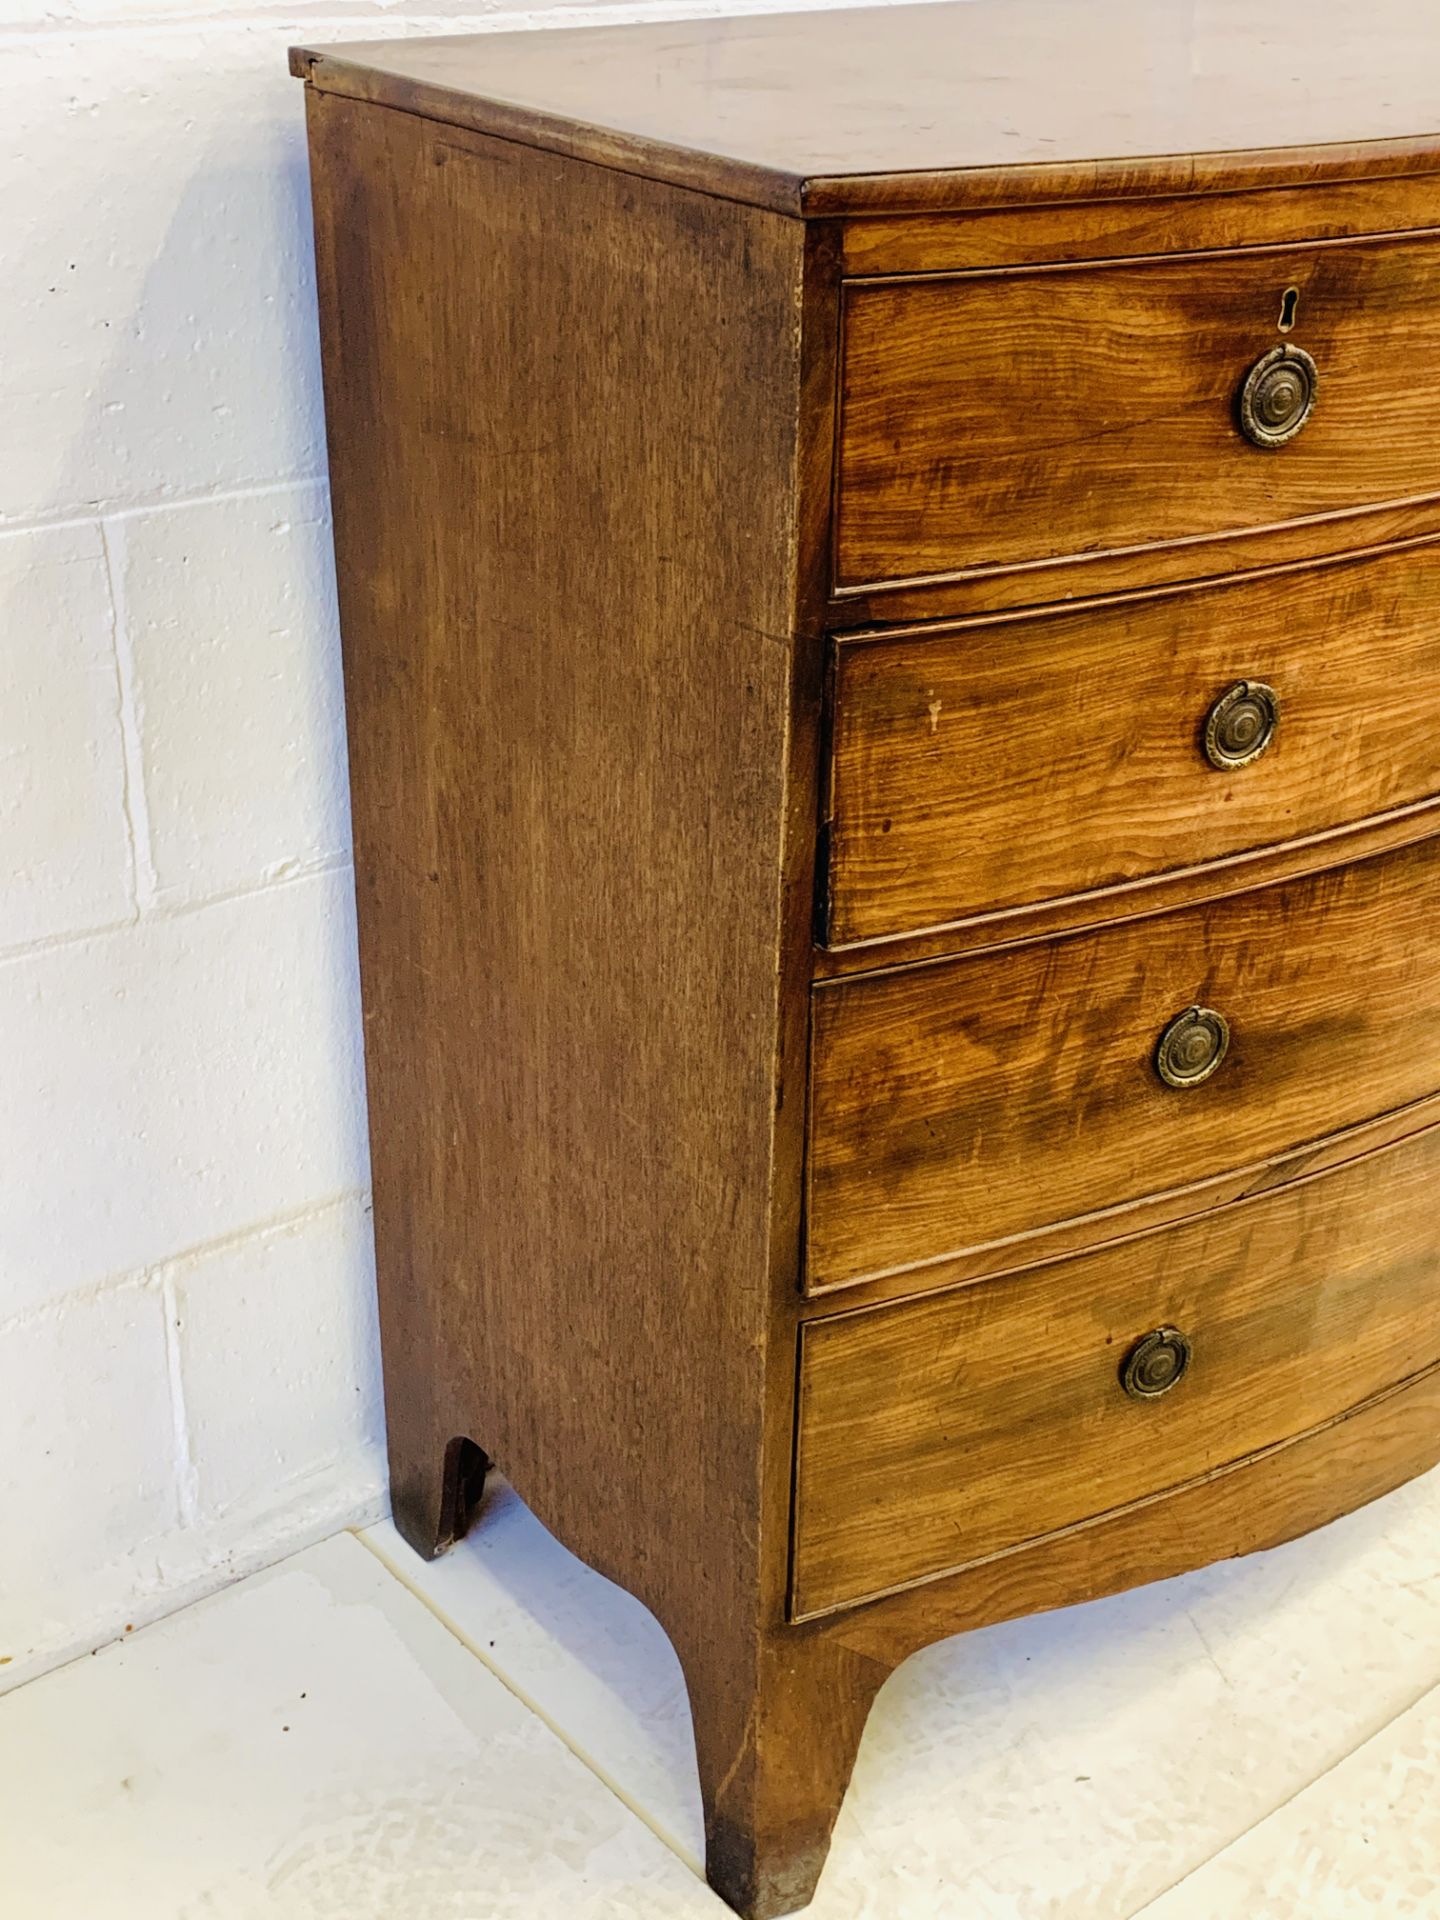 Mahogany chest of drawers - Image 3 of 6